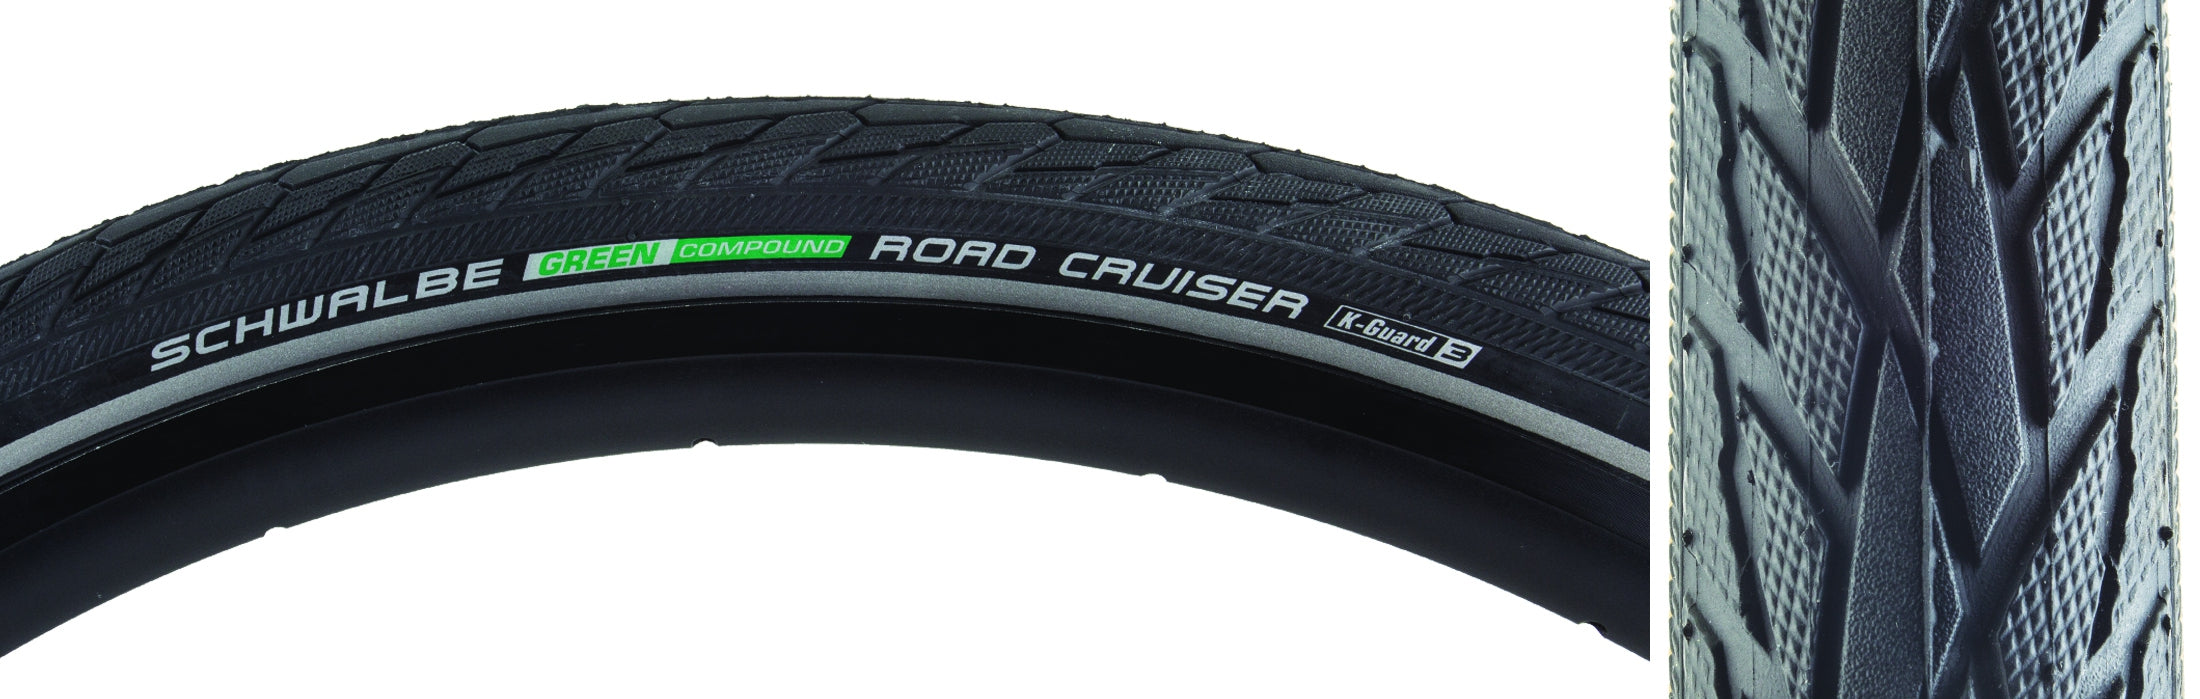 Schwalbe Road Cruiser HS484 Active Twin K-Guard, Wire Bead Hybrid Tire